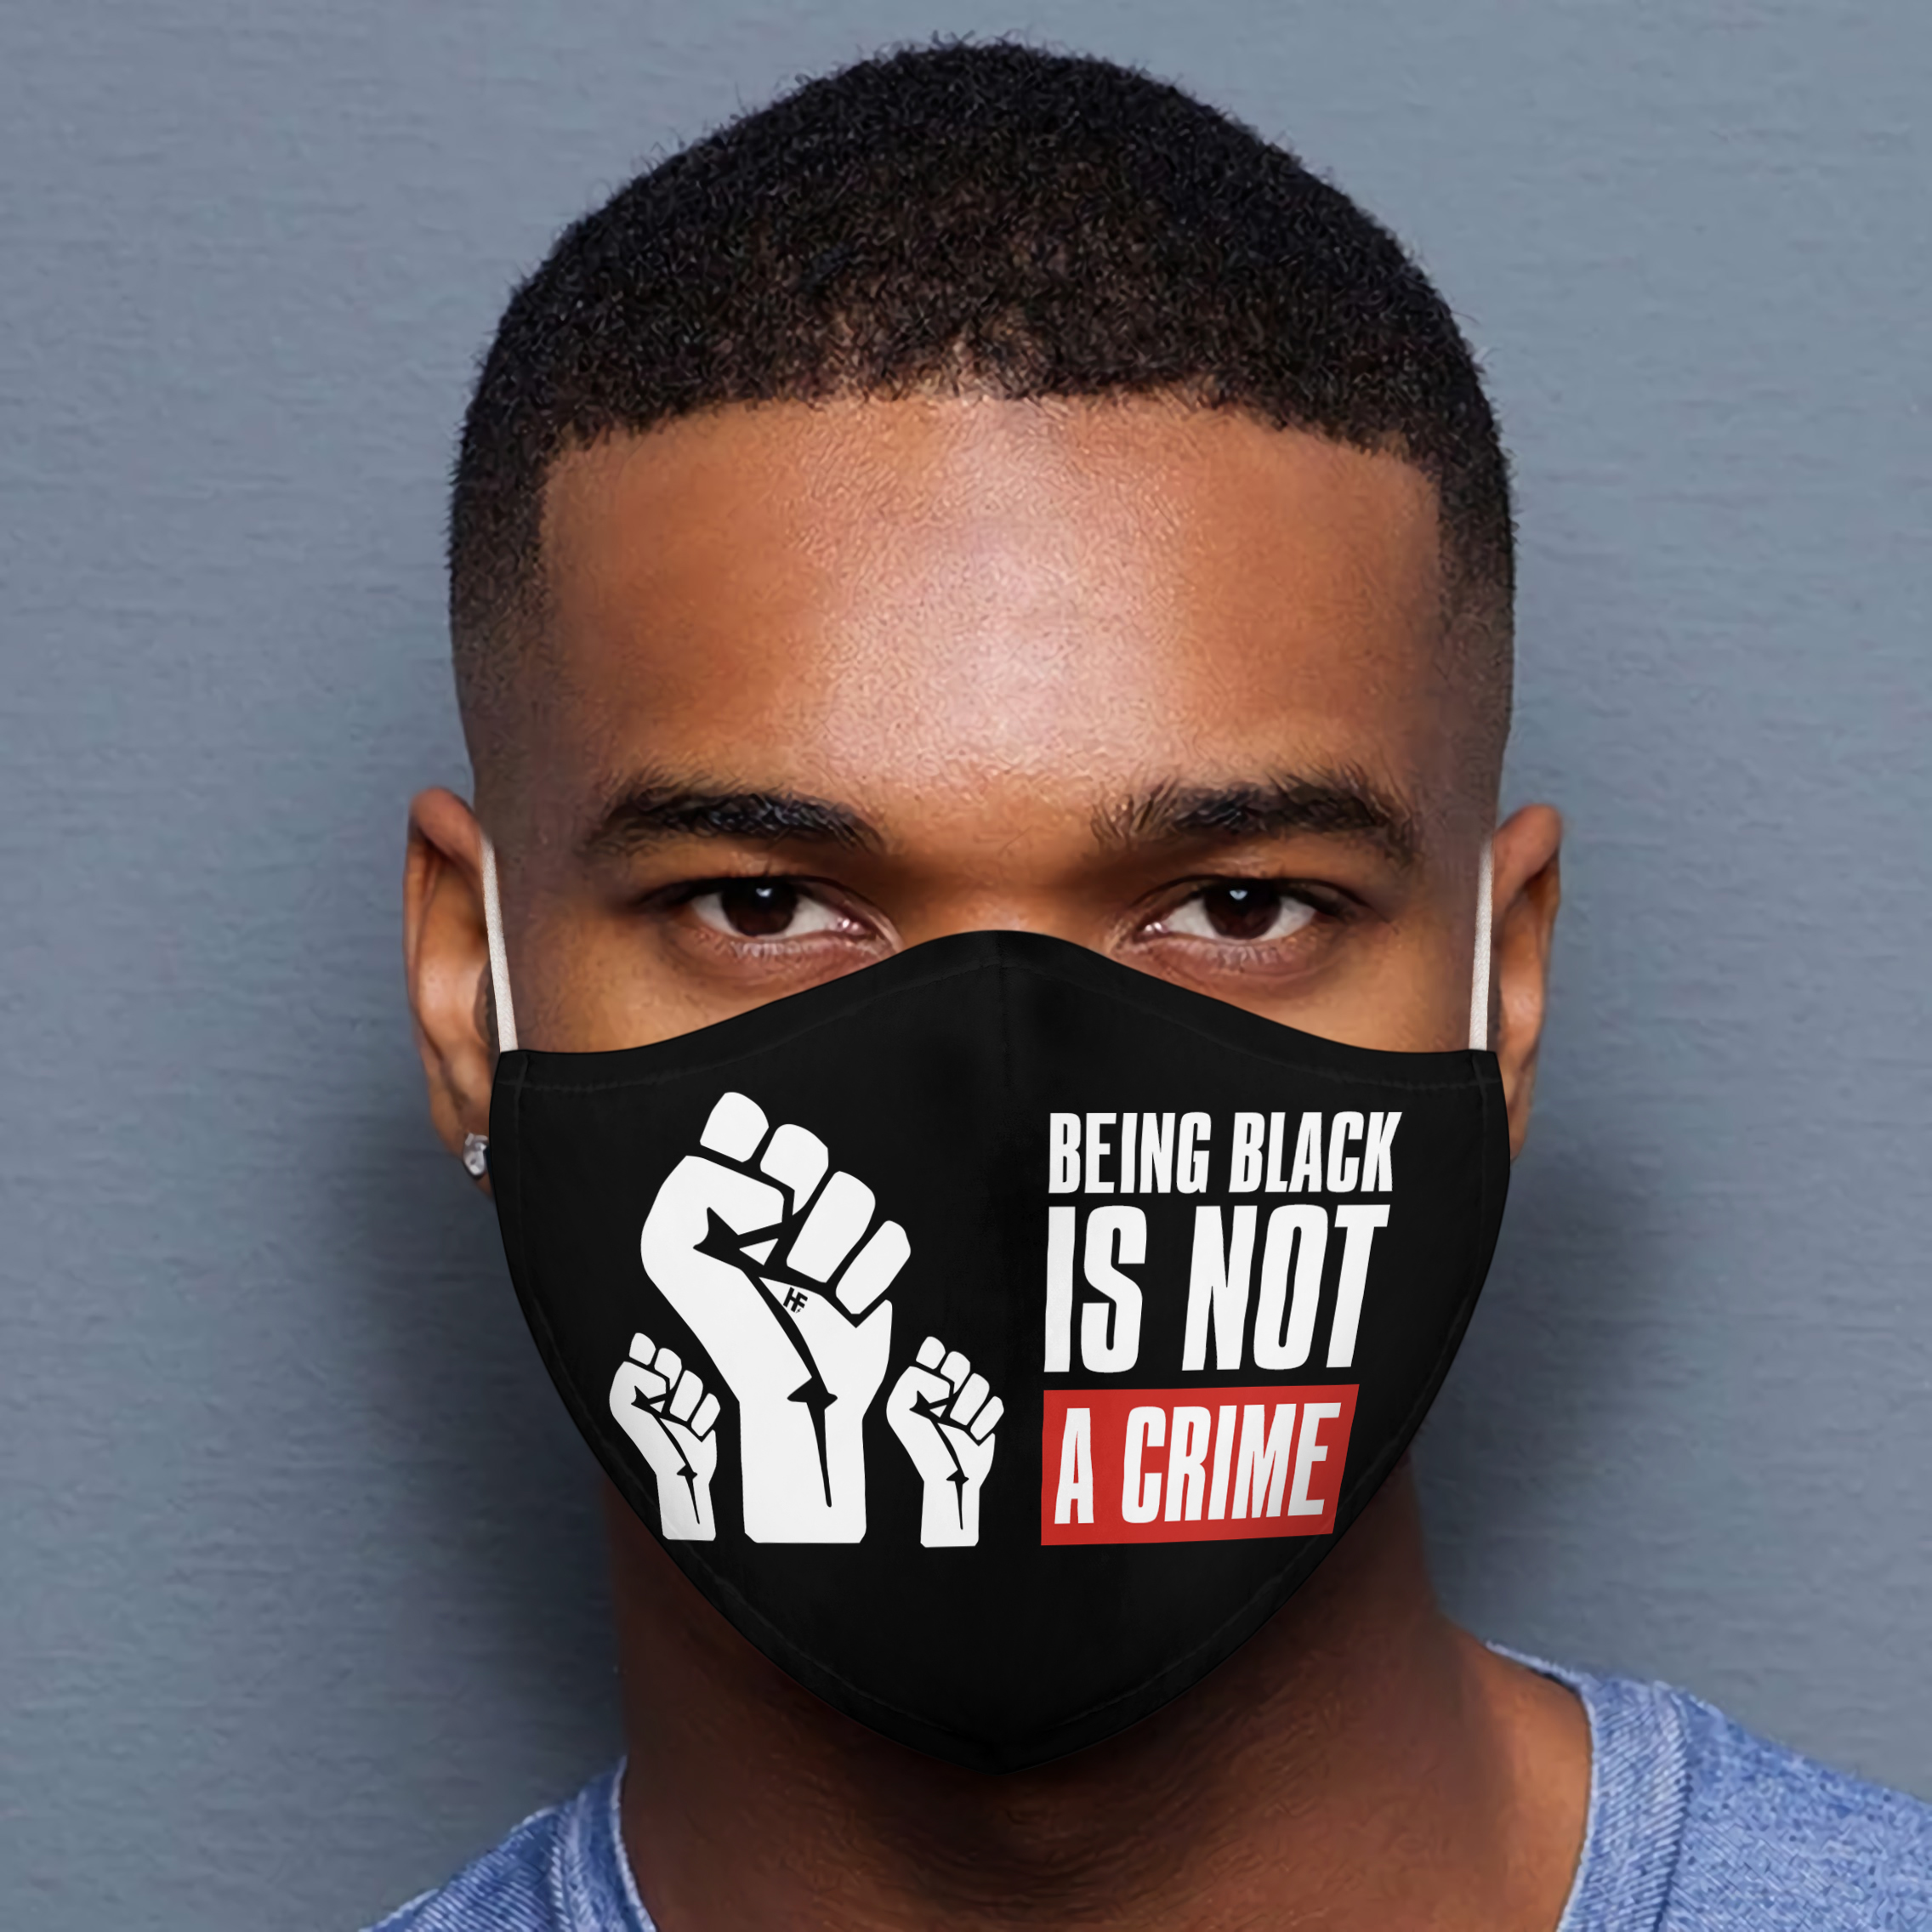 Being Black Is Not A Crime mask